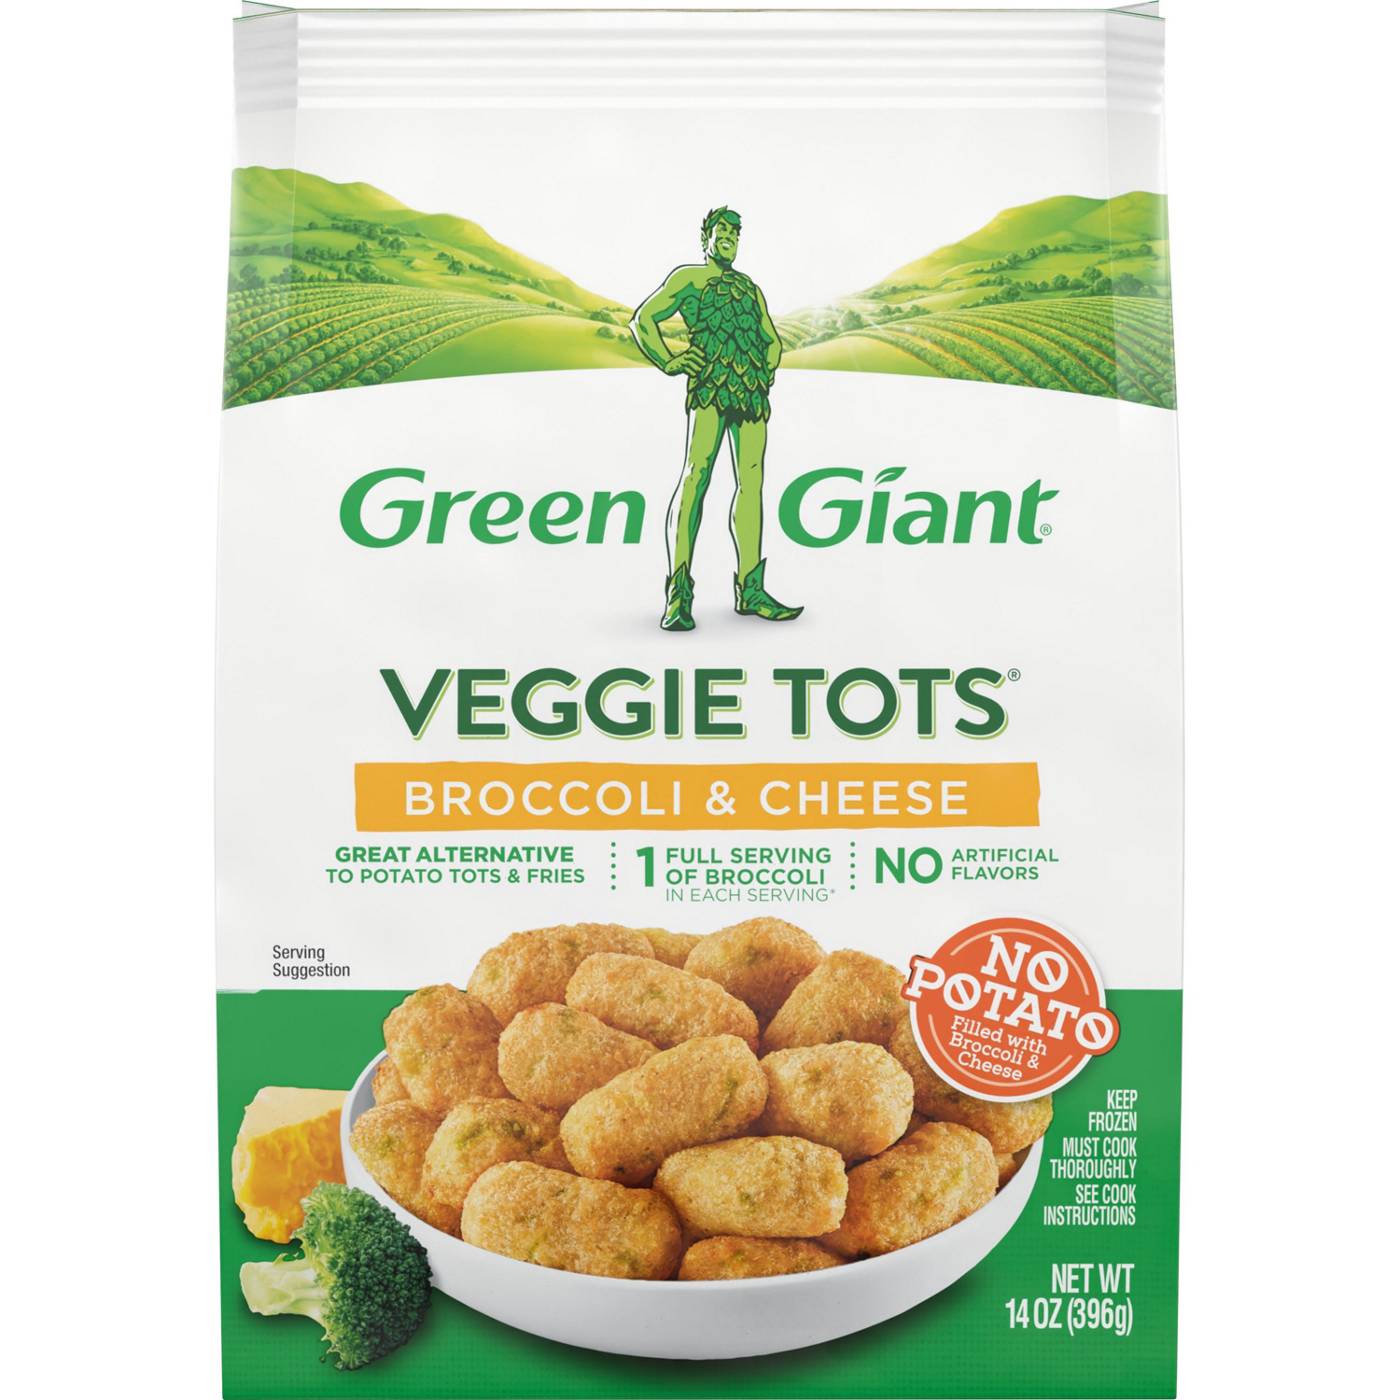 Green Giant Veggie Tots Broccoli & Cheese; image 1 of 3